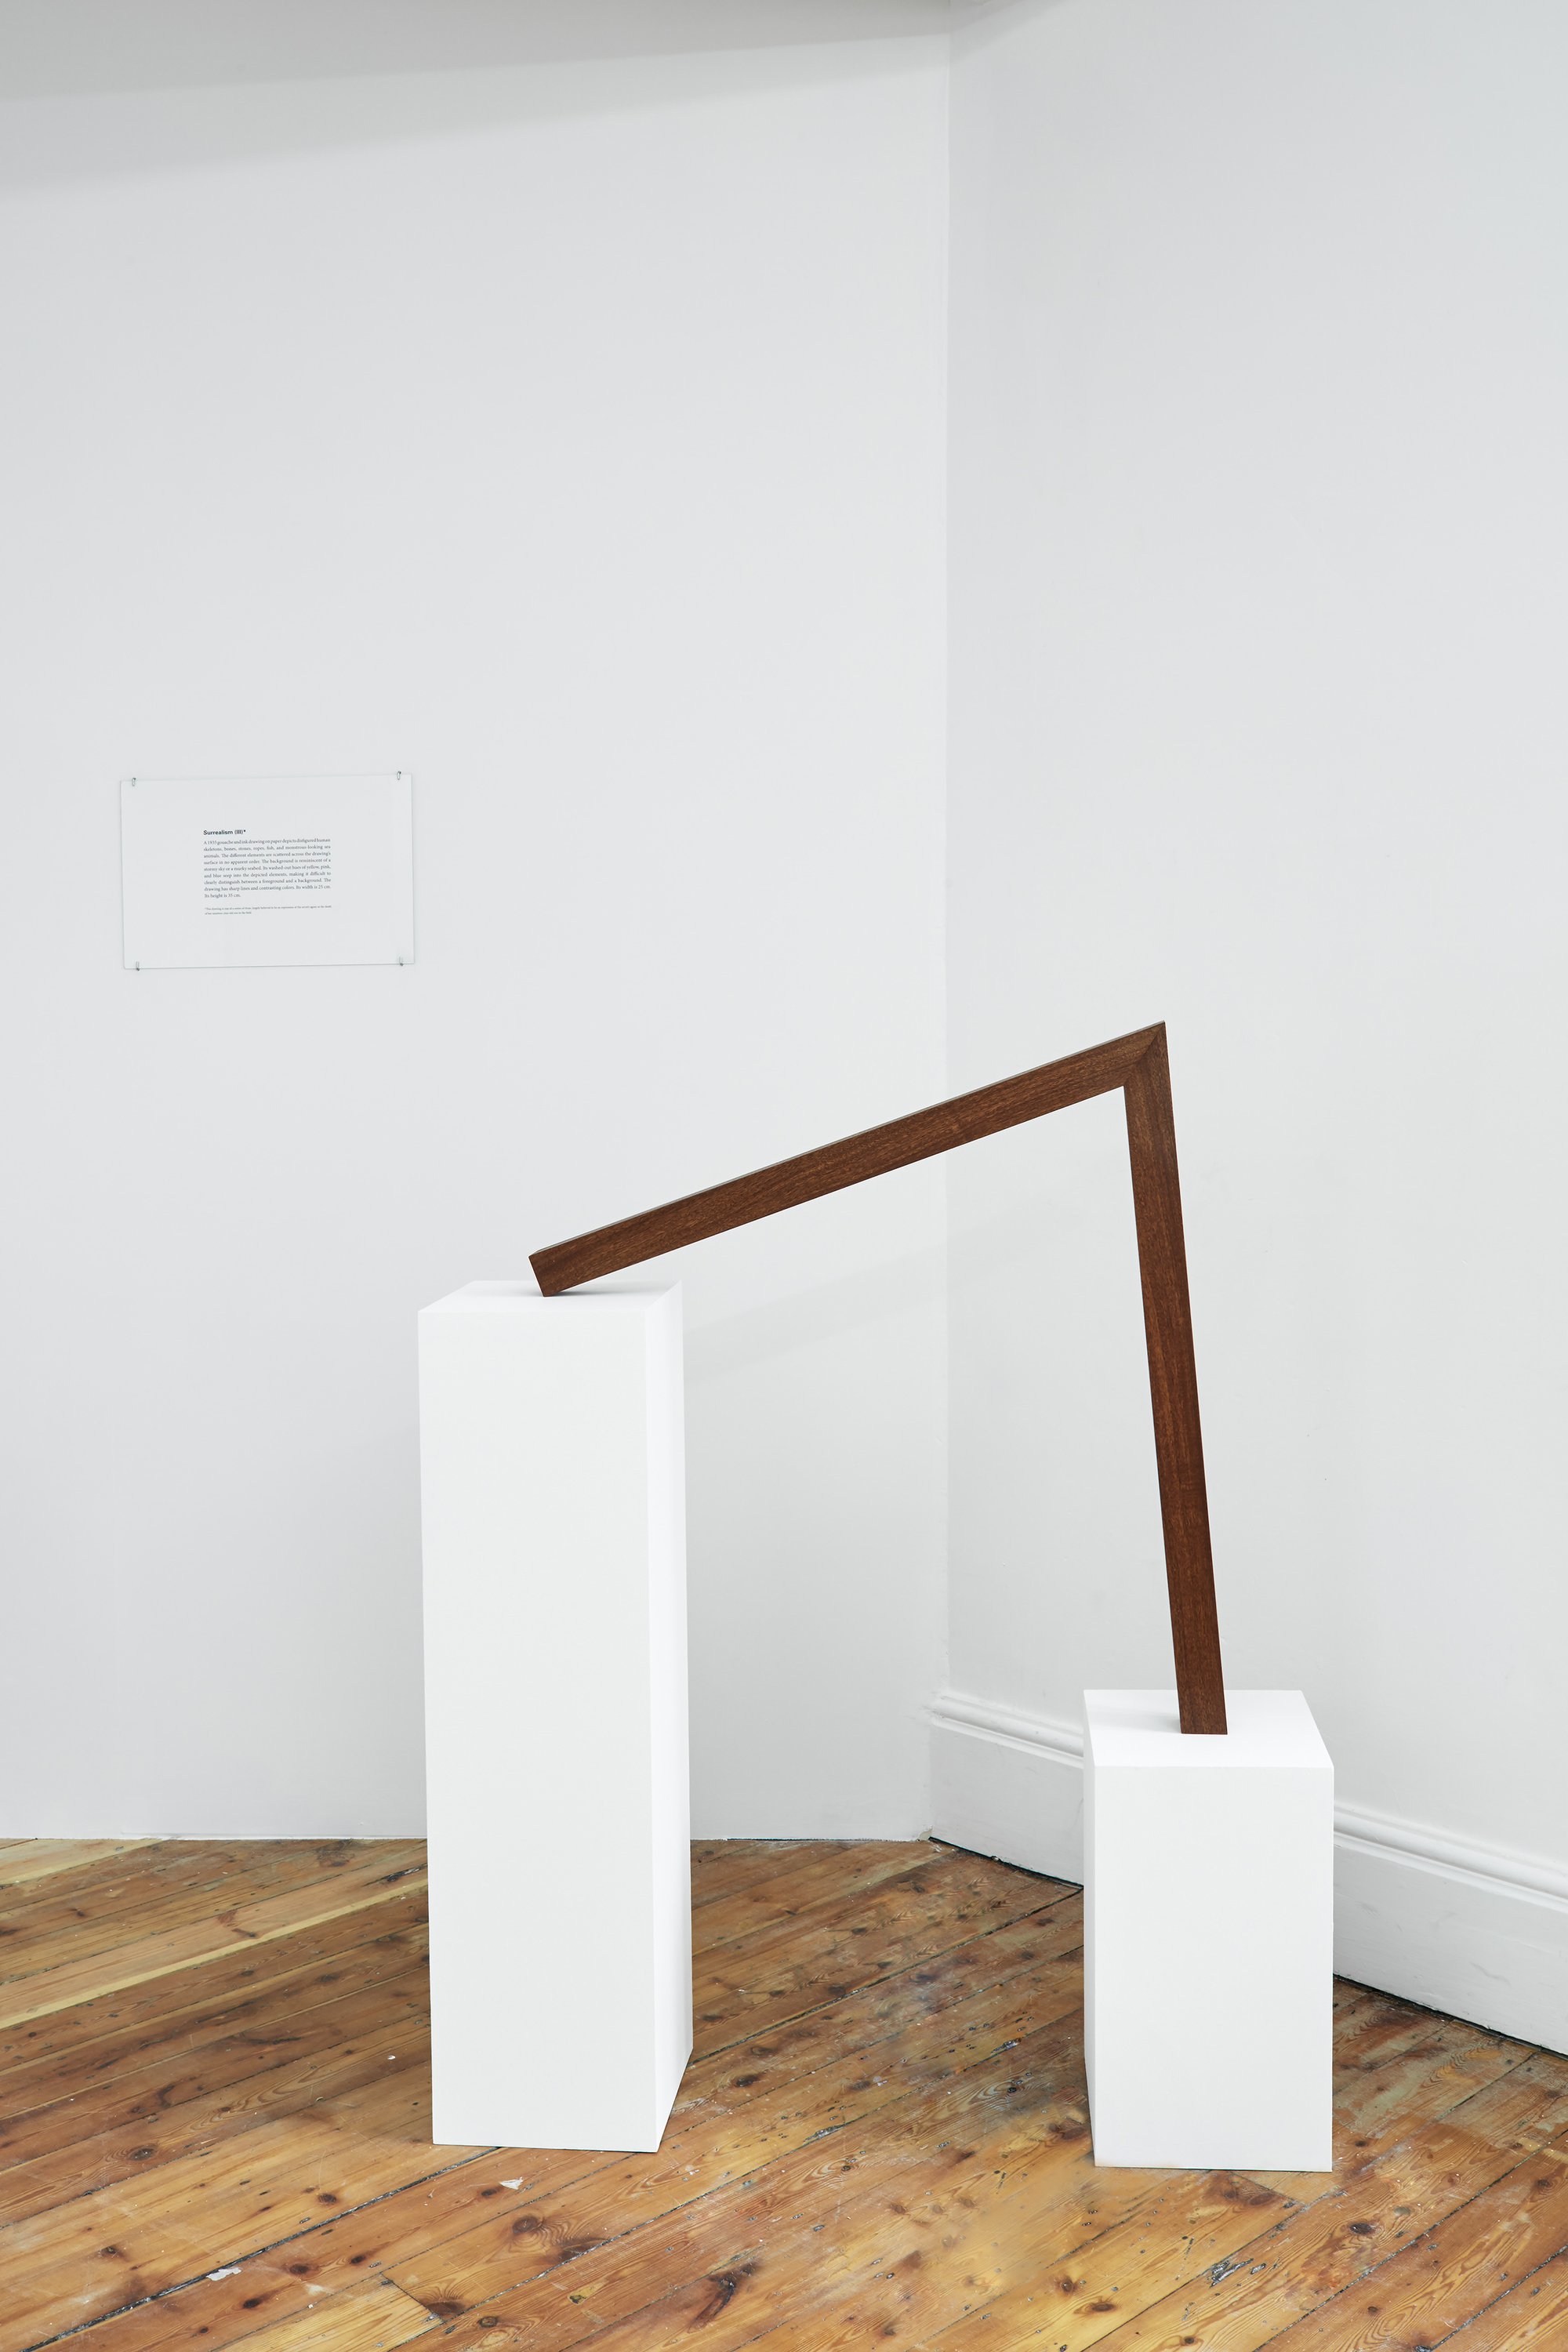 Iman Issa, Surrealism III (study for 2014), mahogany sculpture, text panel under glass and two white plinths, sculpture: 79.6 x 75 x 5 cm, small plinth: 45 x 25 x 25 cm, large plinth: 93.3 x 25 x 25 cm, 2014